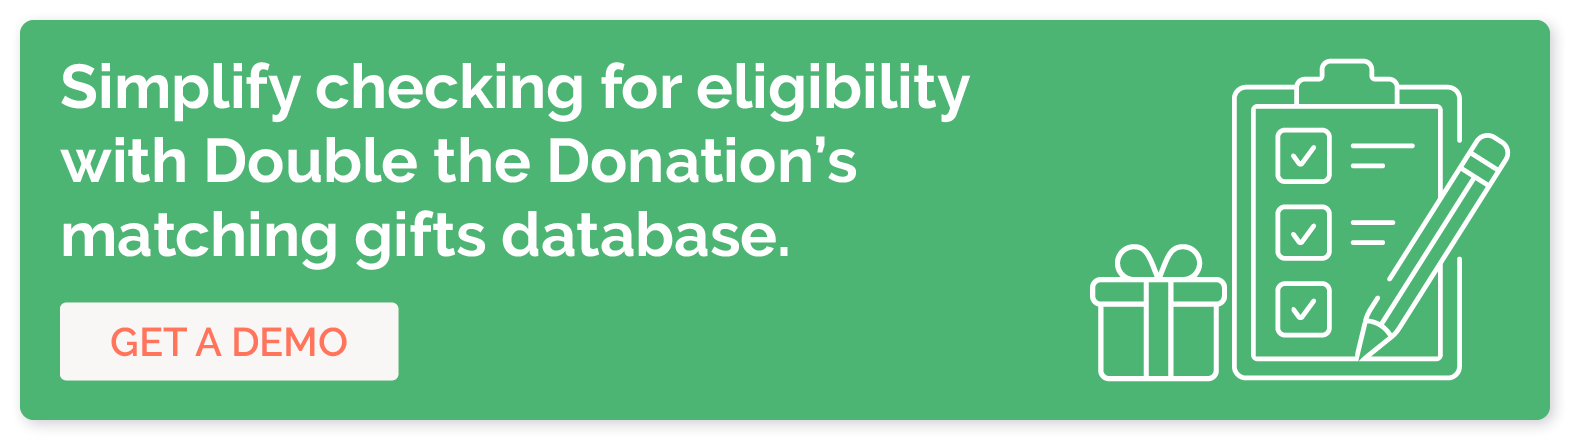 Click to get a demo of Double the Donation’s software solution to help determine your nonprofit’s matching gift eligibility.